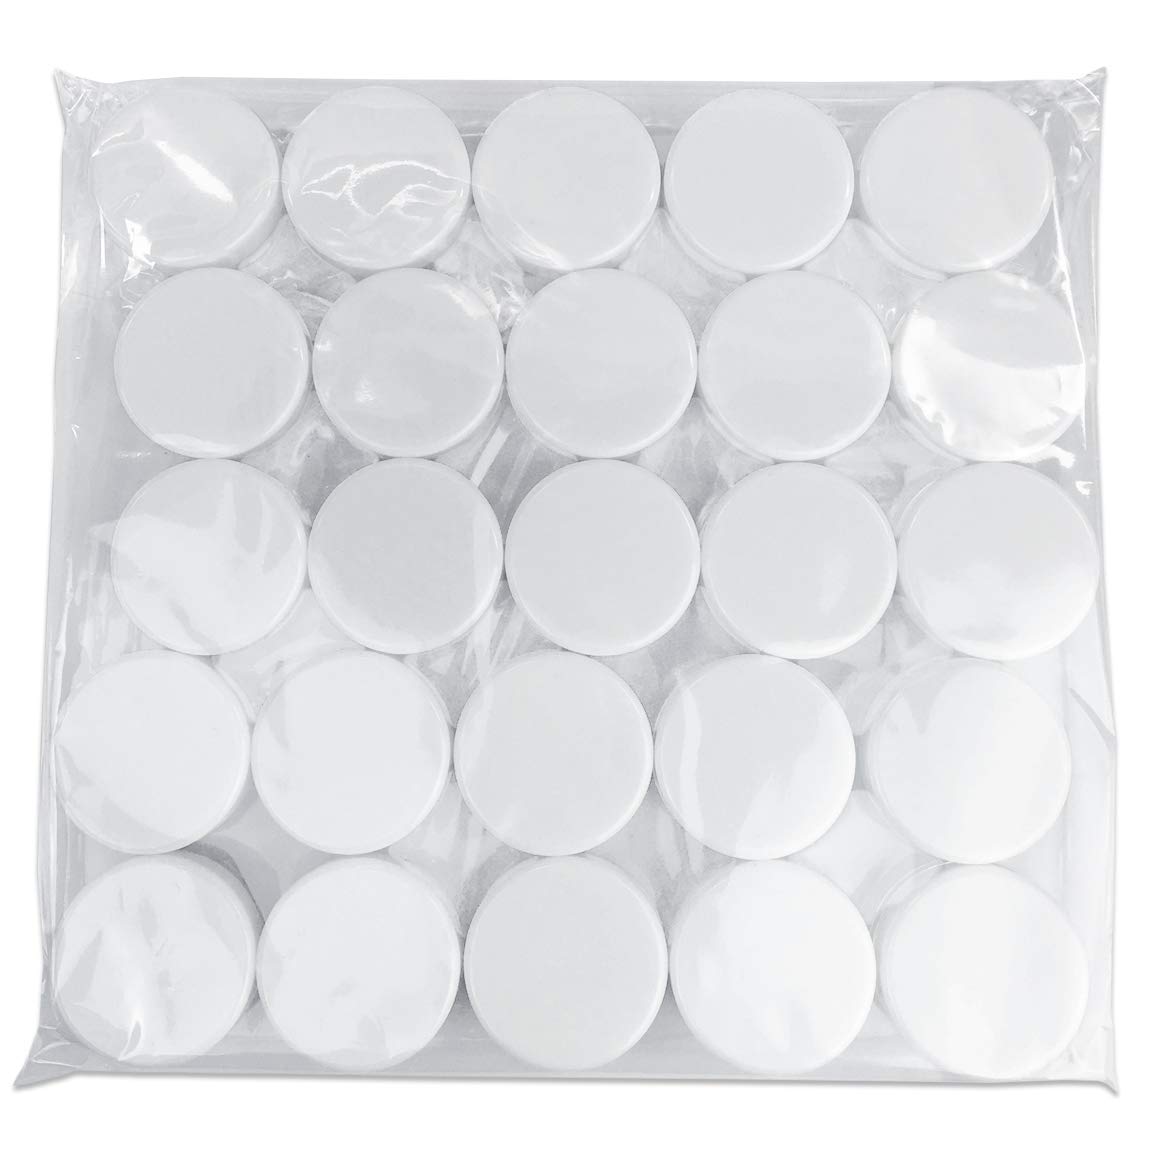 Beauticom (Quantity: 200 Pcs) 3G/3ML Round Clear Jars with White Lids for Small Jewelry, Holding/Mixing Paints, Art Accessories and Other Craft Supplies - BPA Free